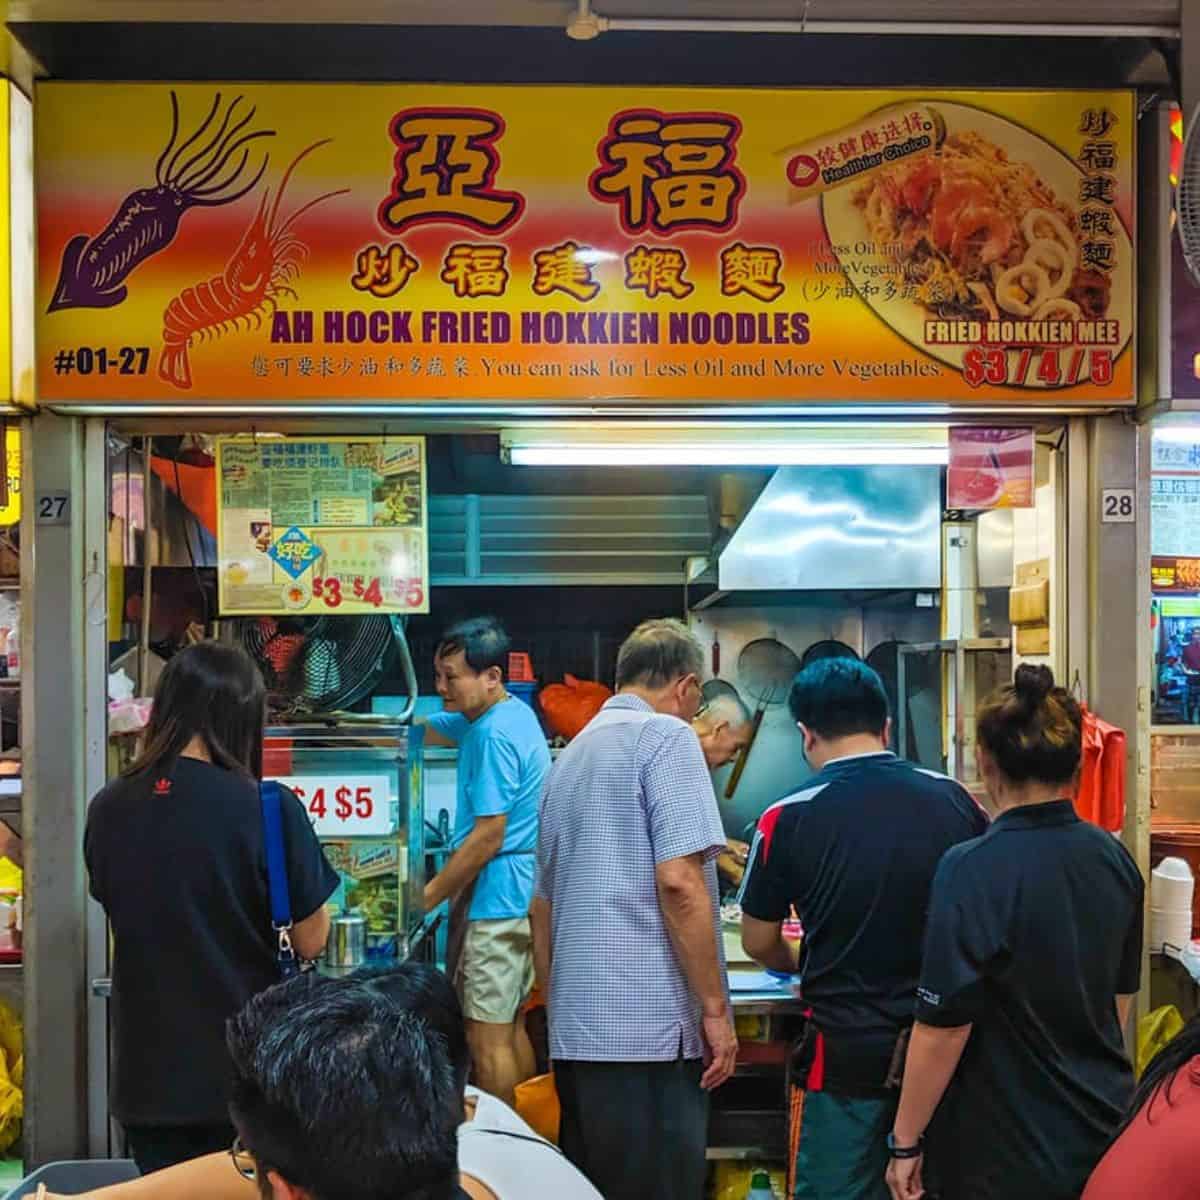 People lining up to try Ah Hock Fried Hokkien Noodles